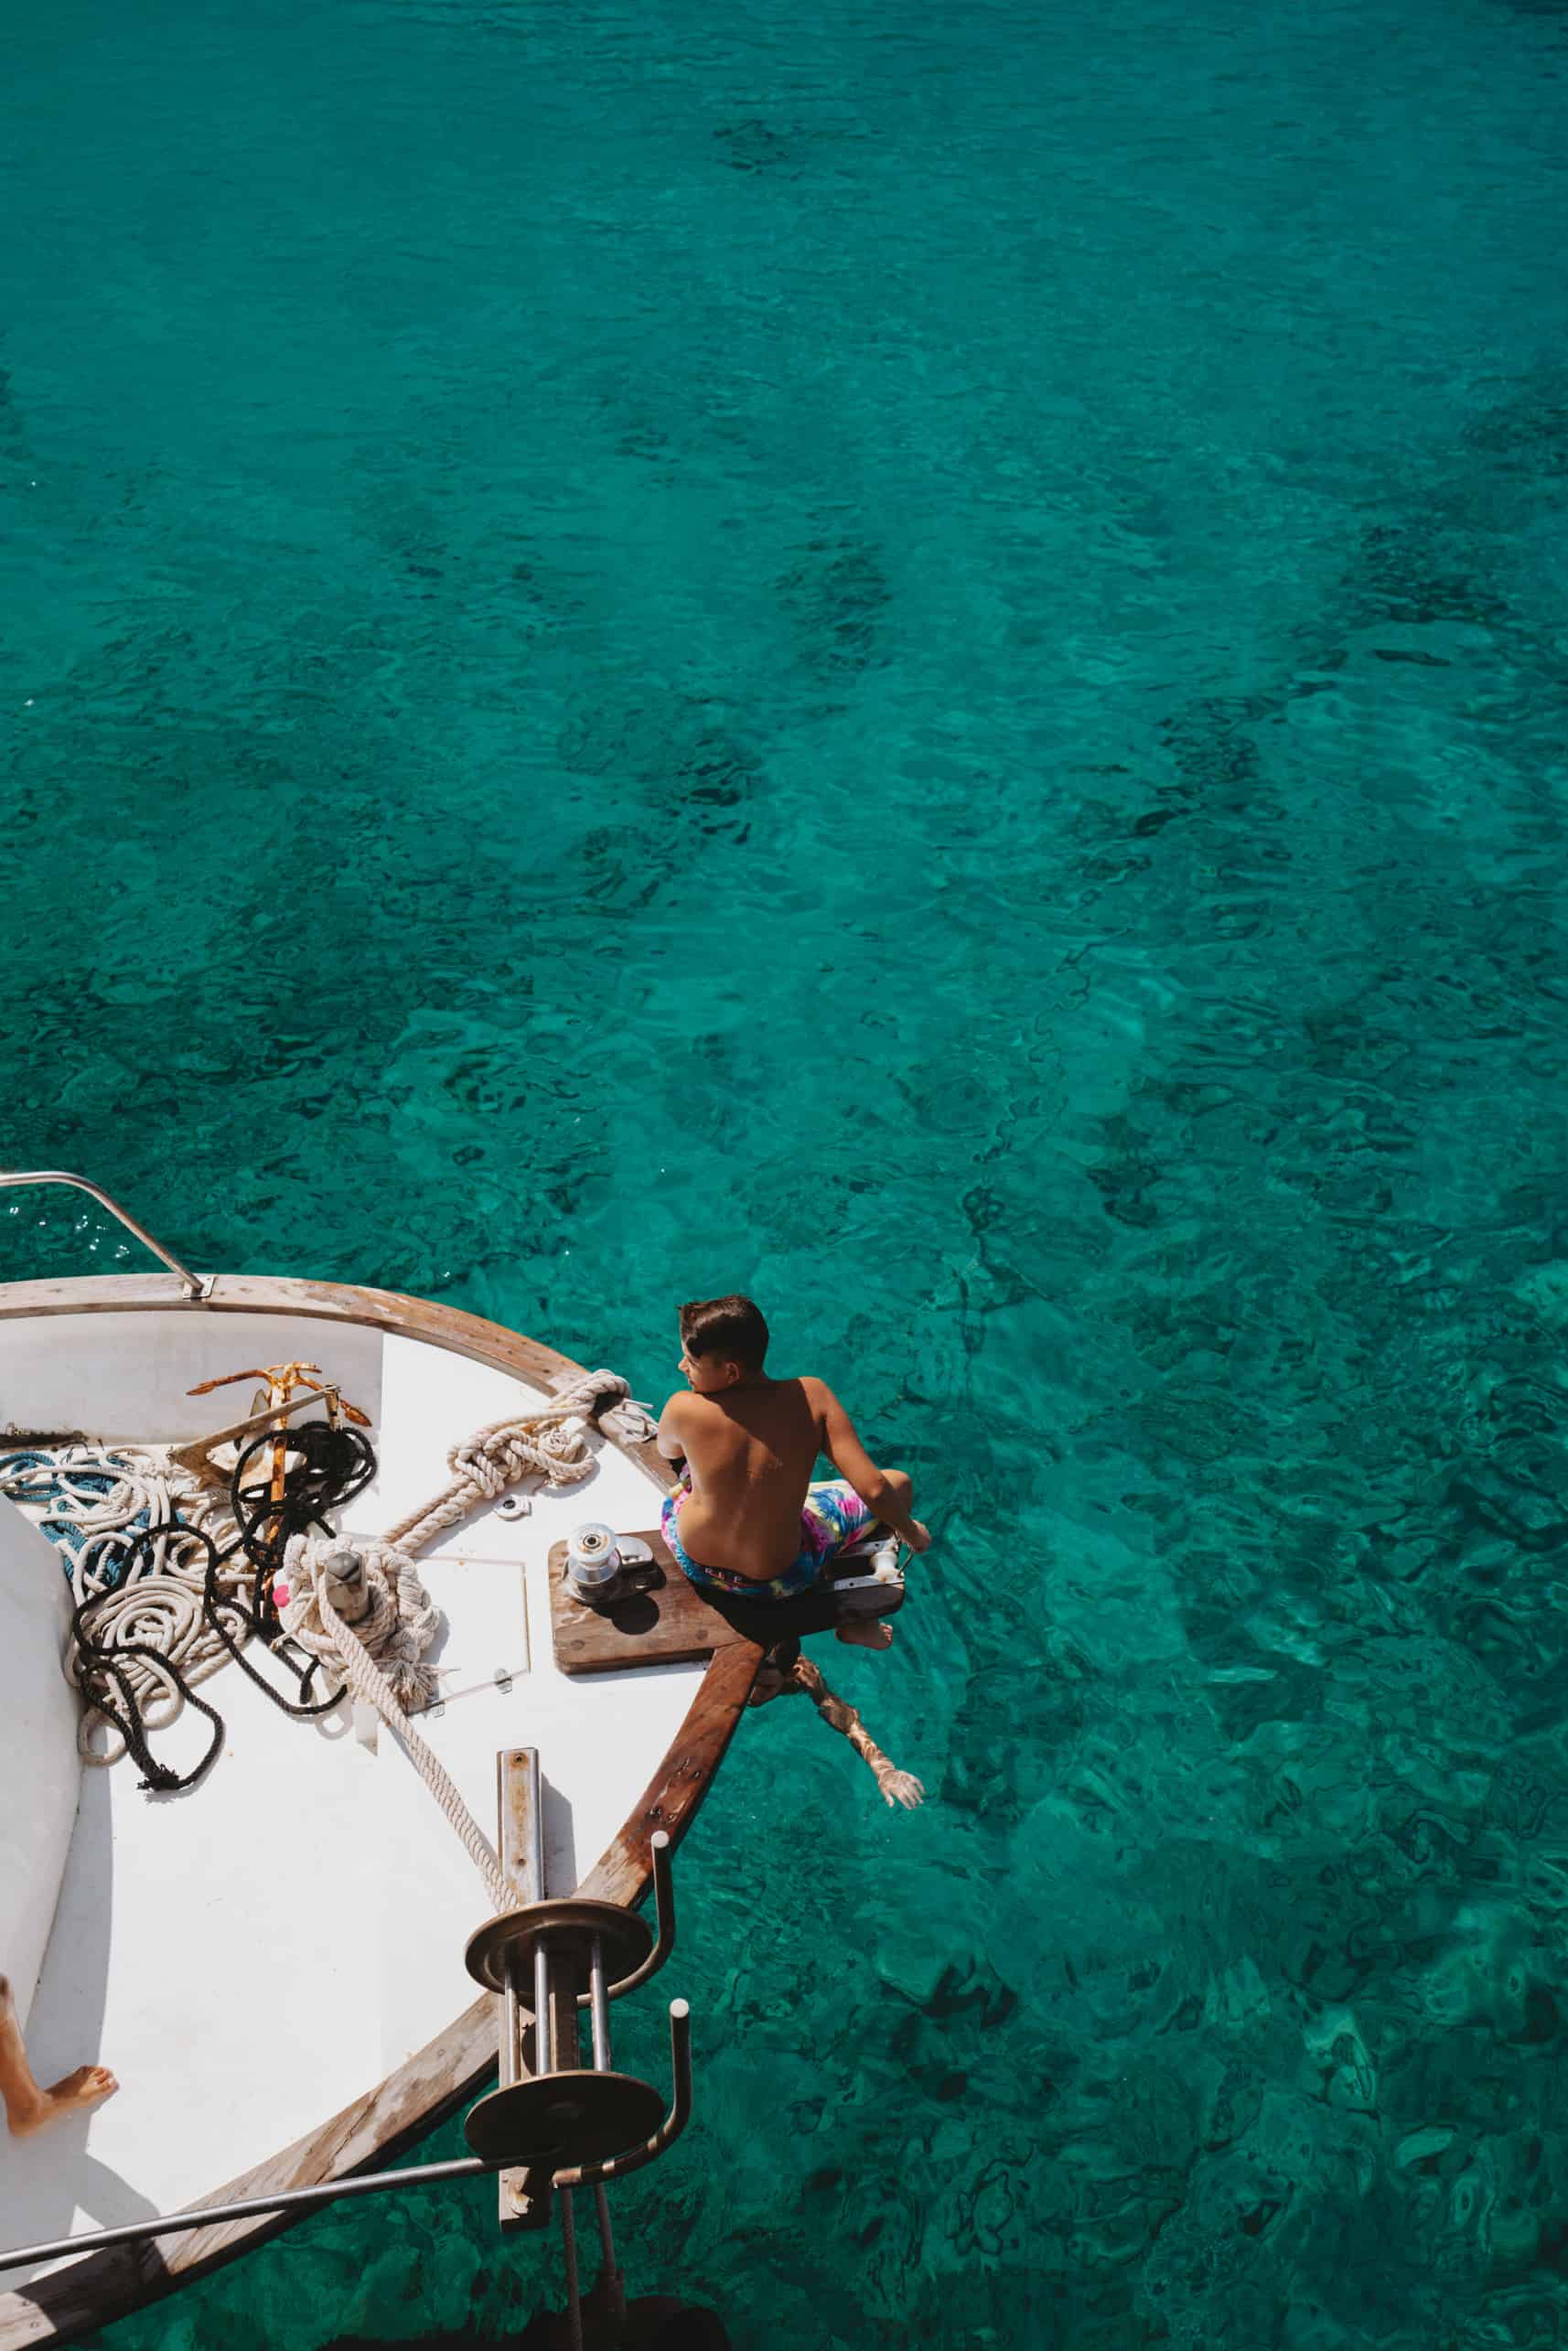 Two people sitting on a boat in the clear blue waters of Milos Island.